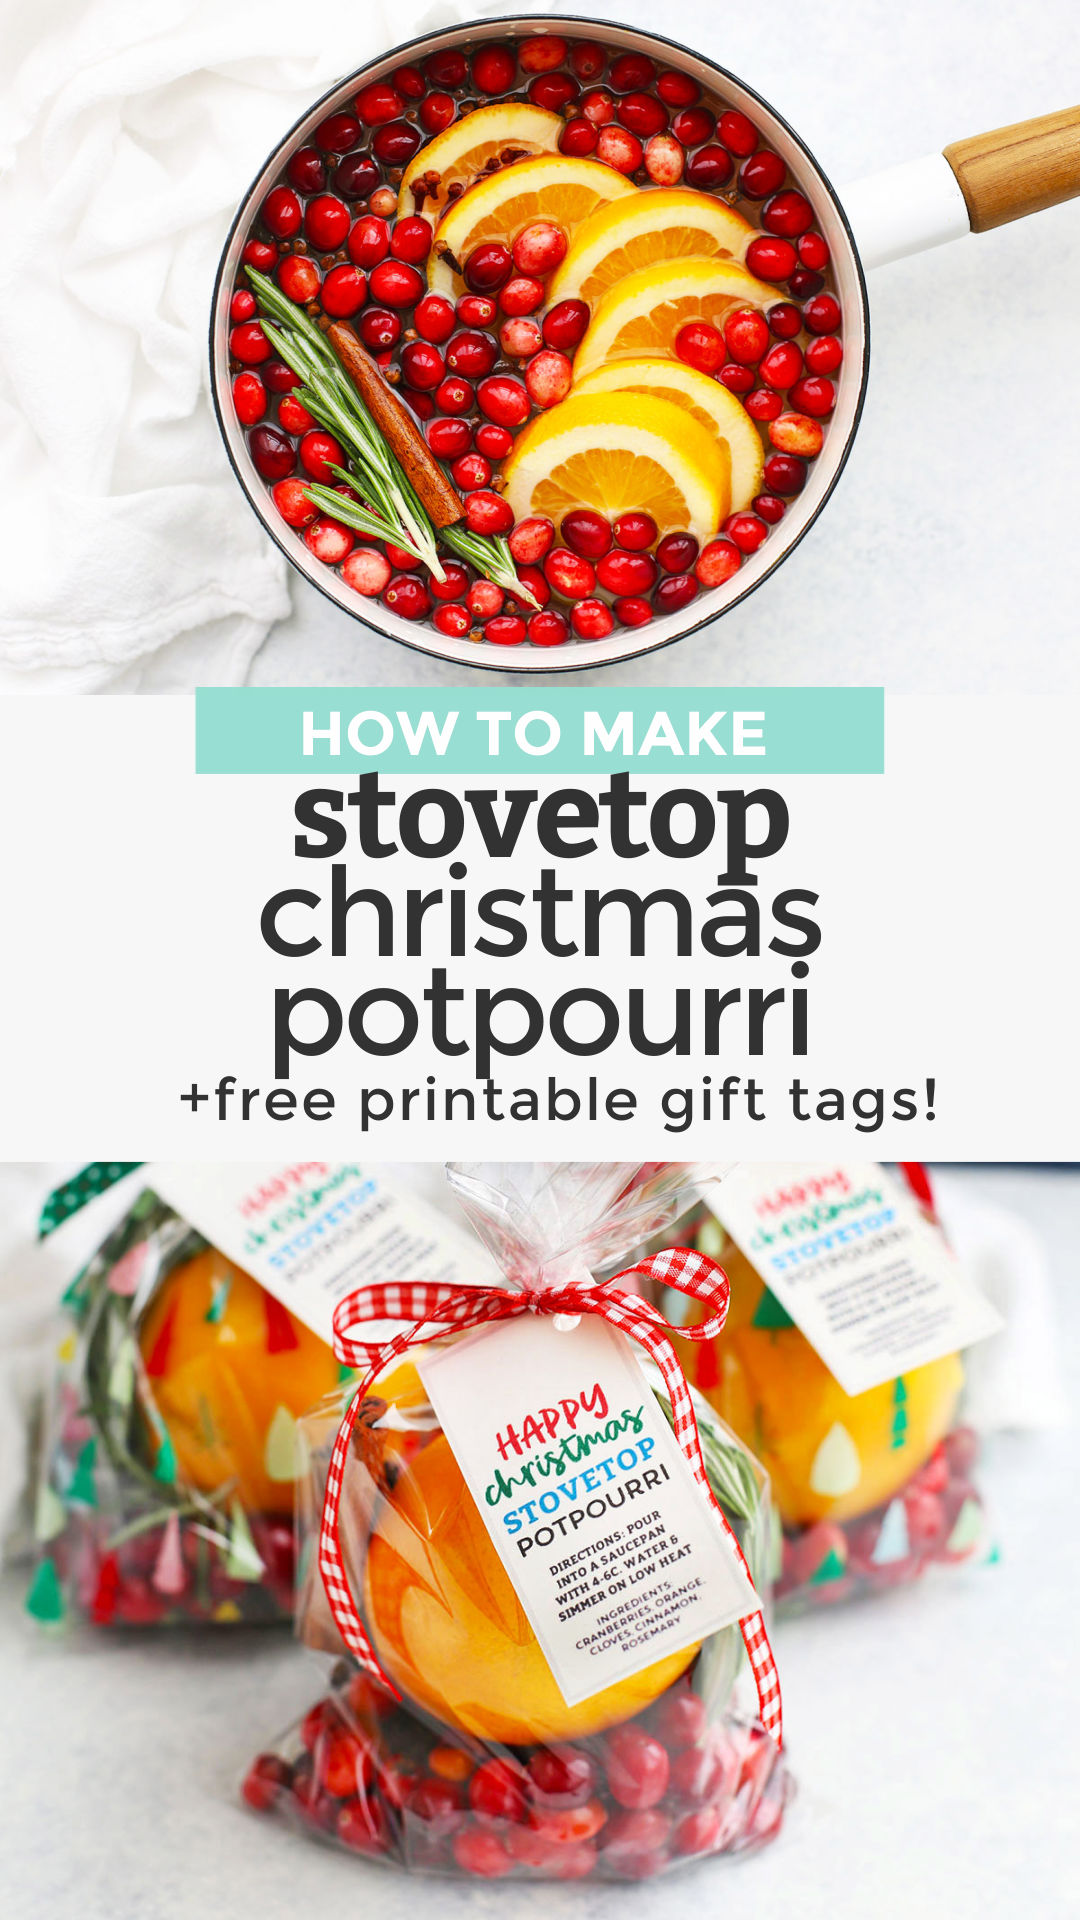 How to Make Stovetop Christmas Potpourri - This holiday potpourri recipe is like bottling up the Christmas smell! It's a great way to make your home smell like the holidays and makes a fantastic gift. Click for a how-to video and FREE PRINTABLE gift tags for gifting! // gift tags // free printable gift tags // free Christmas printable // christmas simmer pot / holiday simmer pot / how to make it smell like Christmas